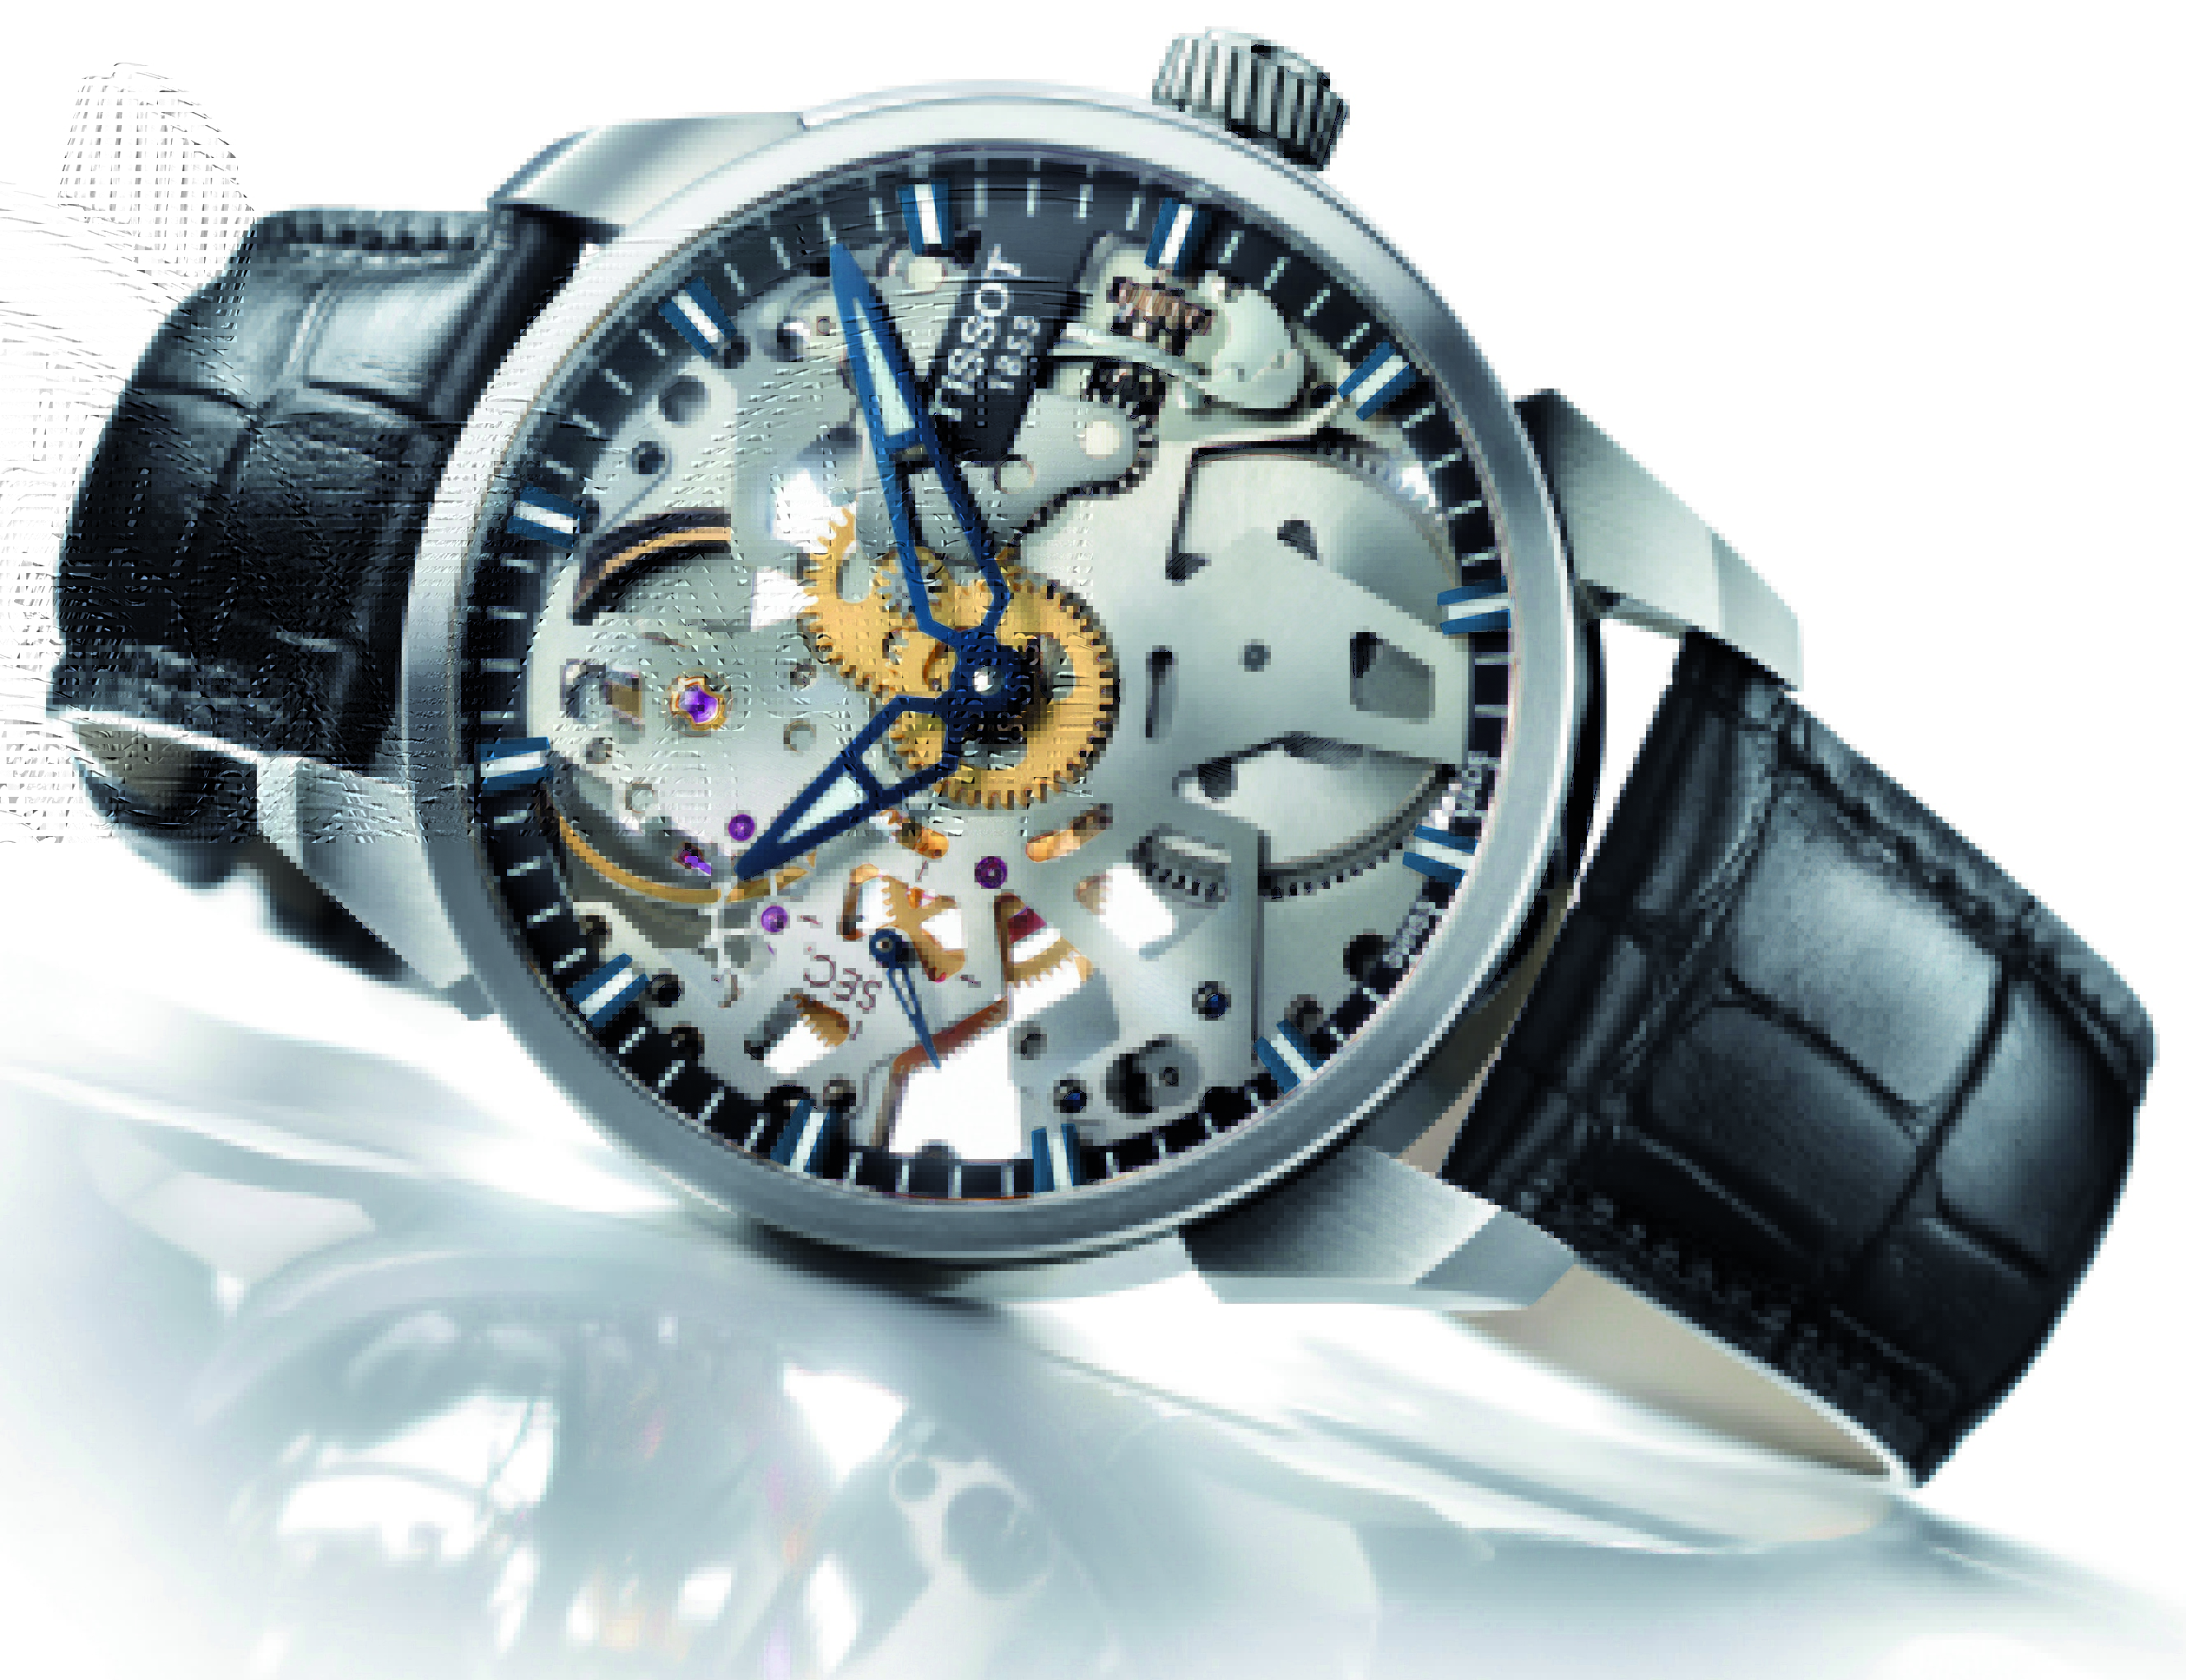 anteprima-baselword-2013-tissot-t-complication-squelette_0-100_1